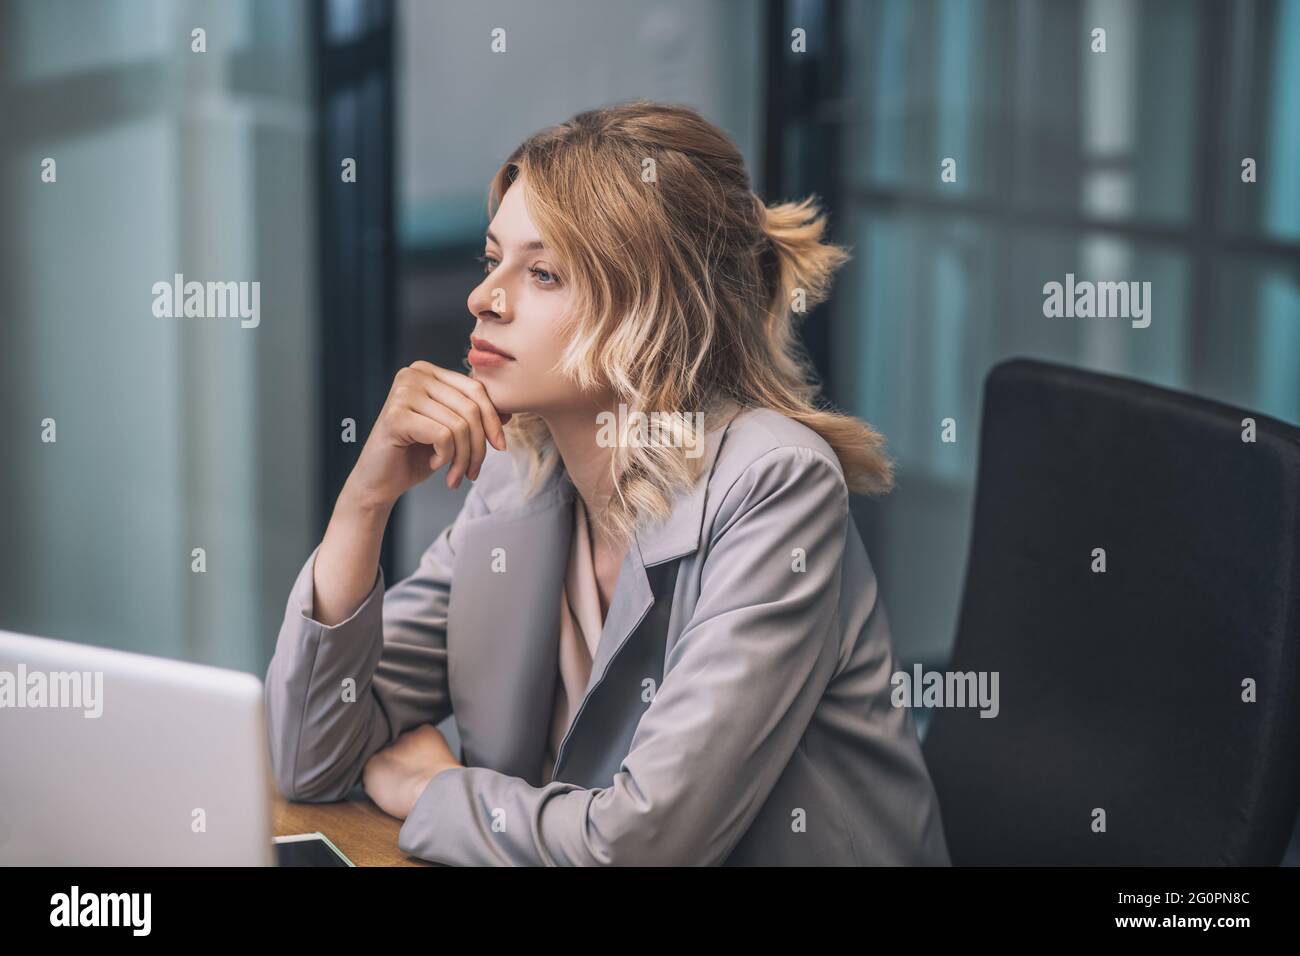 Young adult woman in suit sitting at workplace Stock Photo